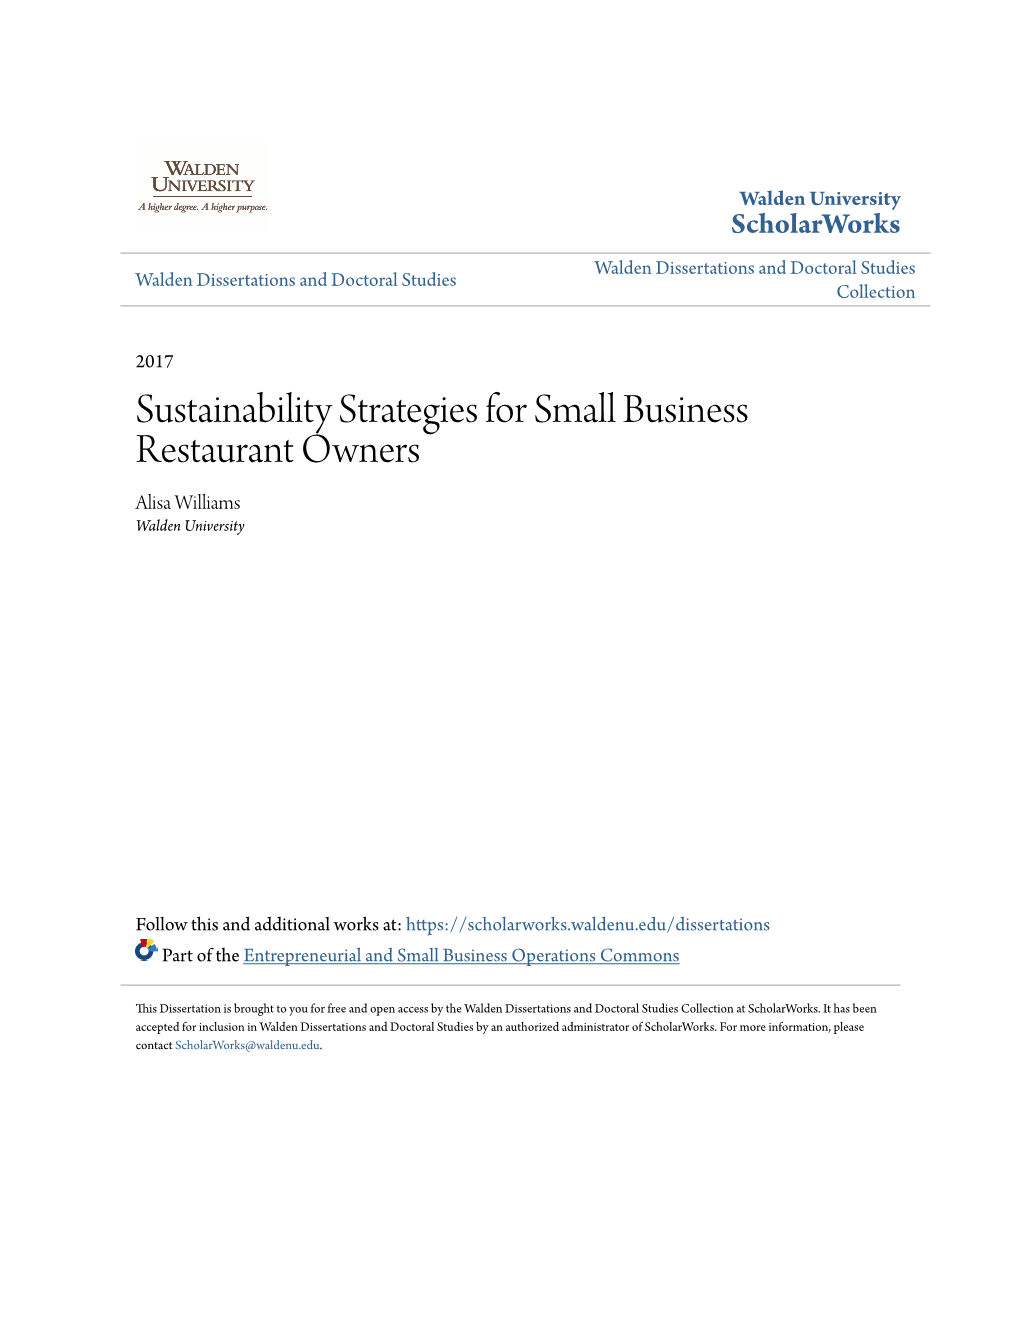 Sustainability Strategies for Small Business Restaurant Owners Alisa Williams Walden University